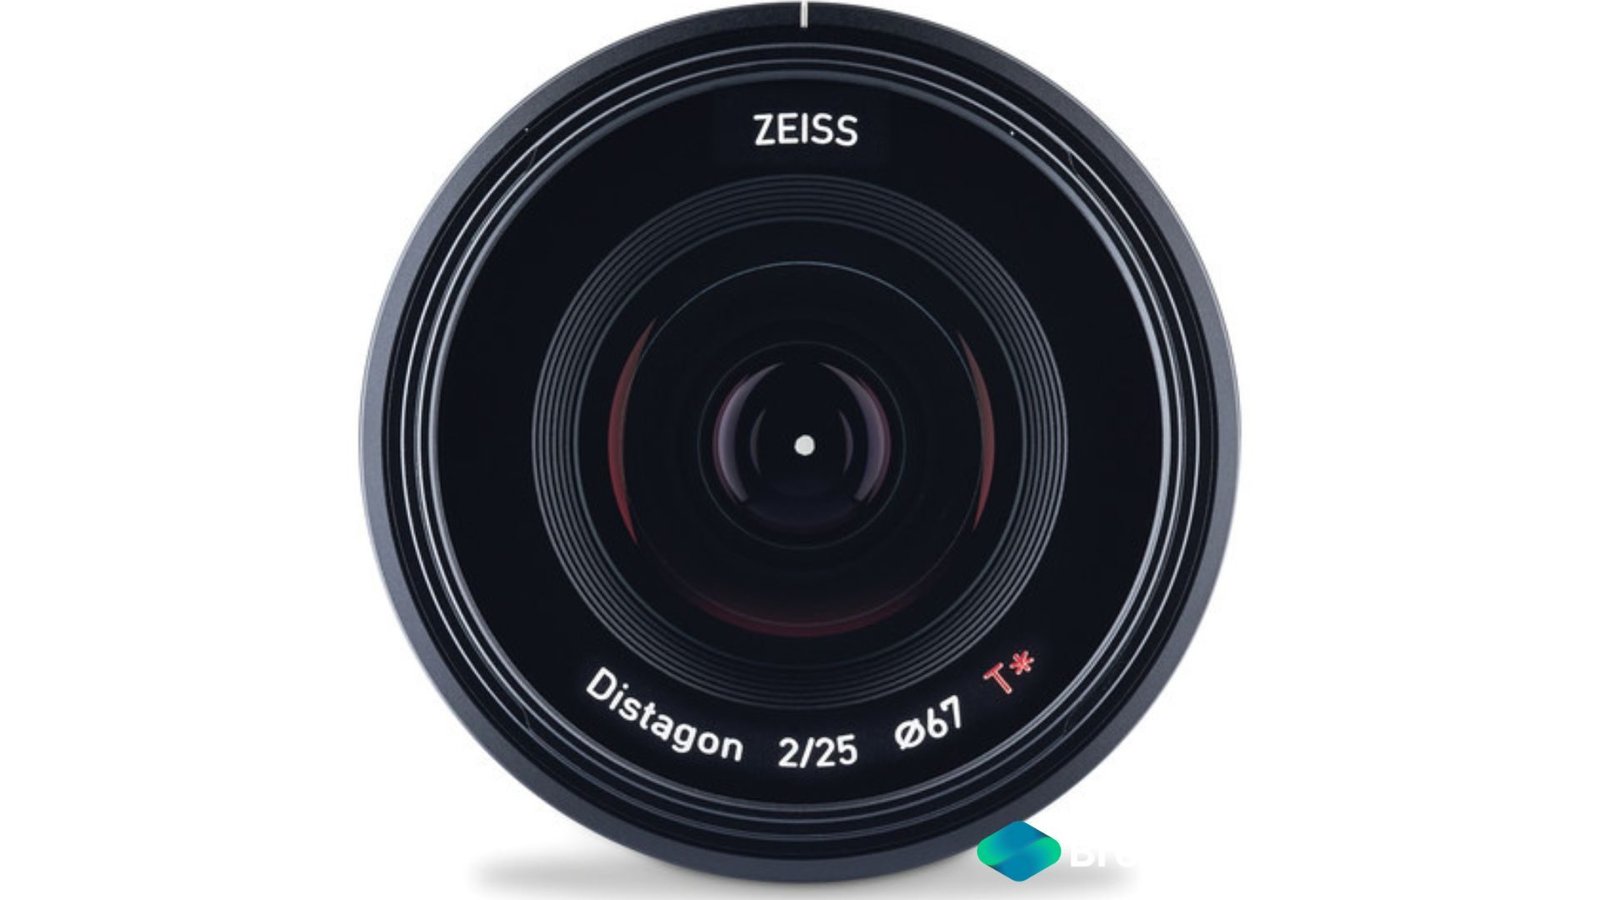 Rent ZEISS Batis Lens for Sony E Mount 2/25 in Delhi NCR, Camera, Camera lenses for rent, Camera accessories, in Delhi Gurgaon Noida, hire Shooting equipment, Lighting equipment rental, Film gear rental for Video production, camera rental company in Delhi, film equipment rental company